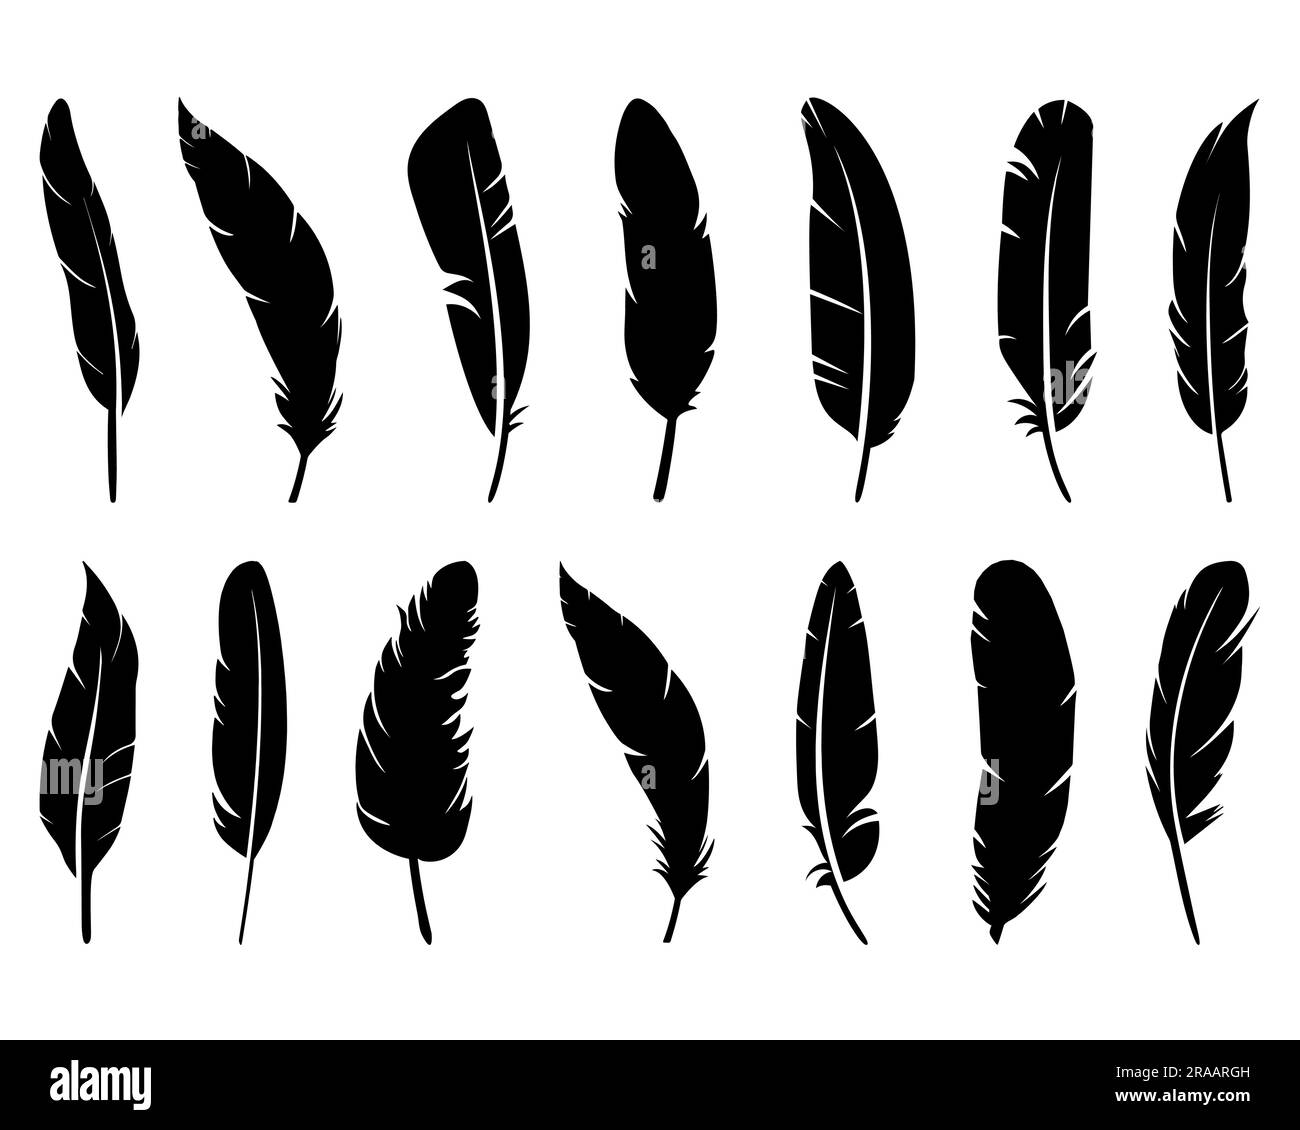 Feather Stock Vector Images - Alamy